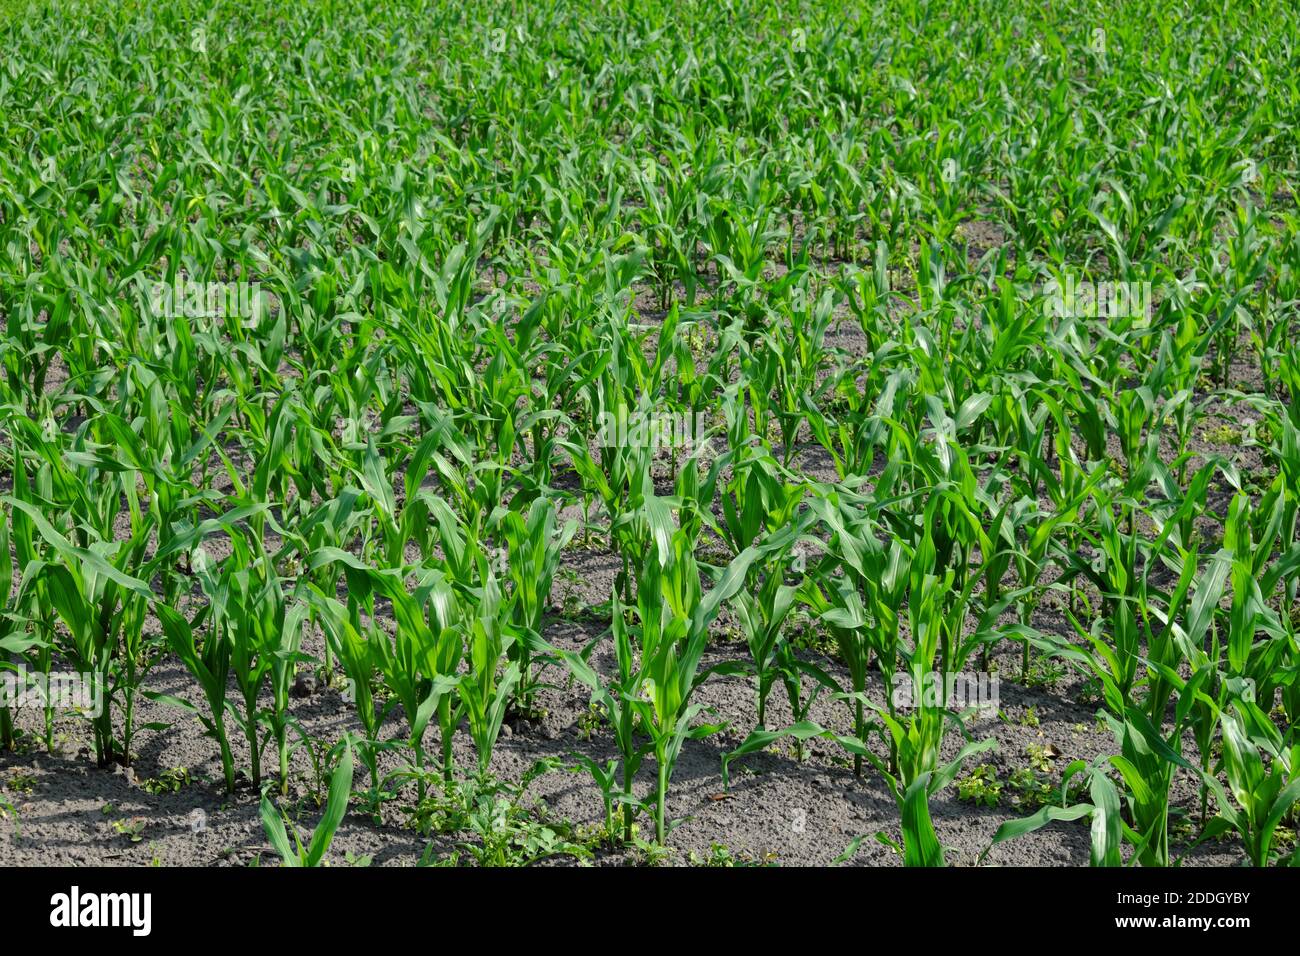 The stalks of young corn grow in the field. Stock Photo